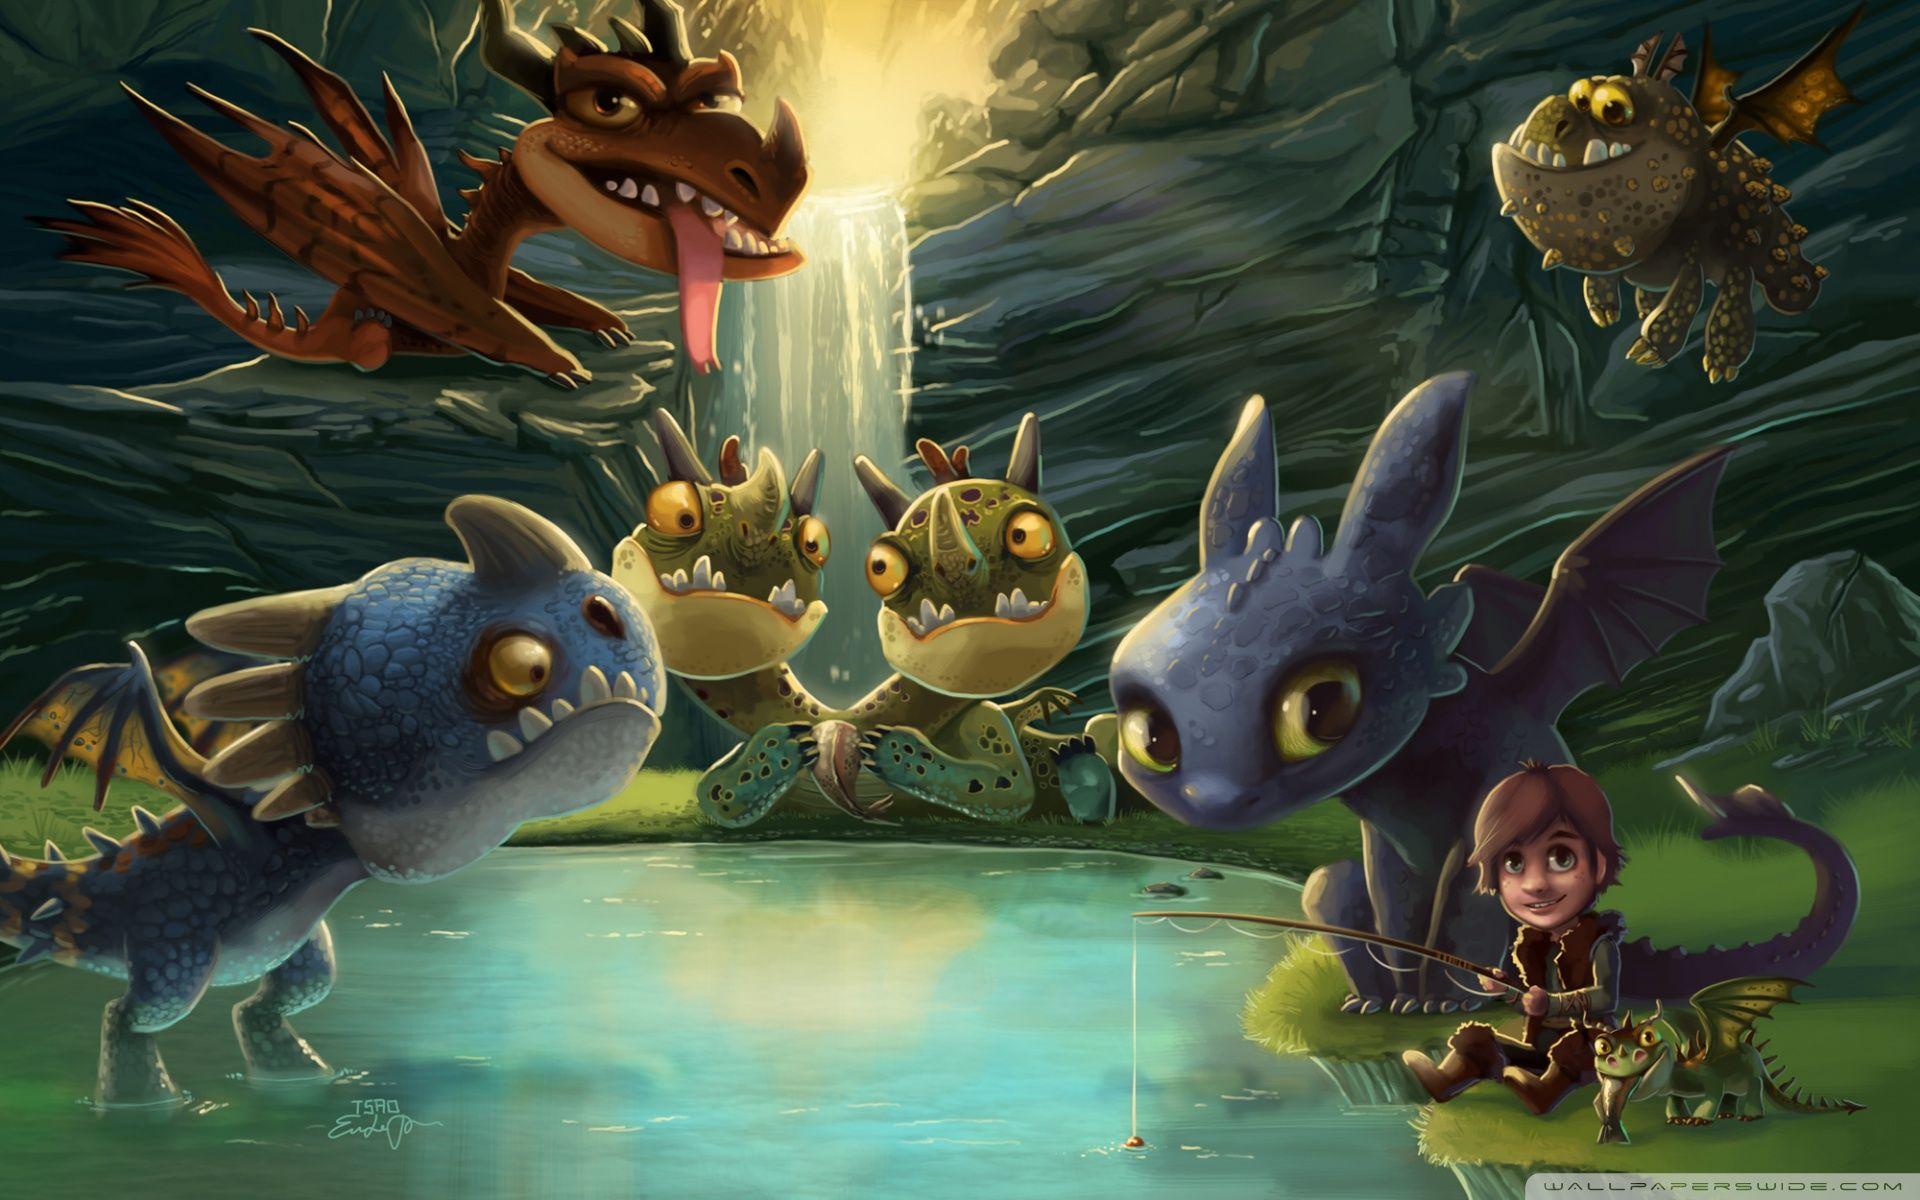 Hiccup, Toothless and friends ❤ 4K HD Desktop Wallpaper for 4K